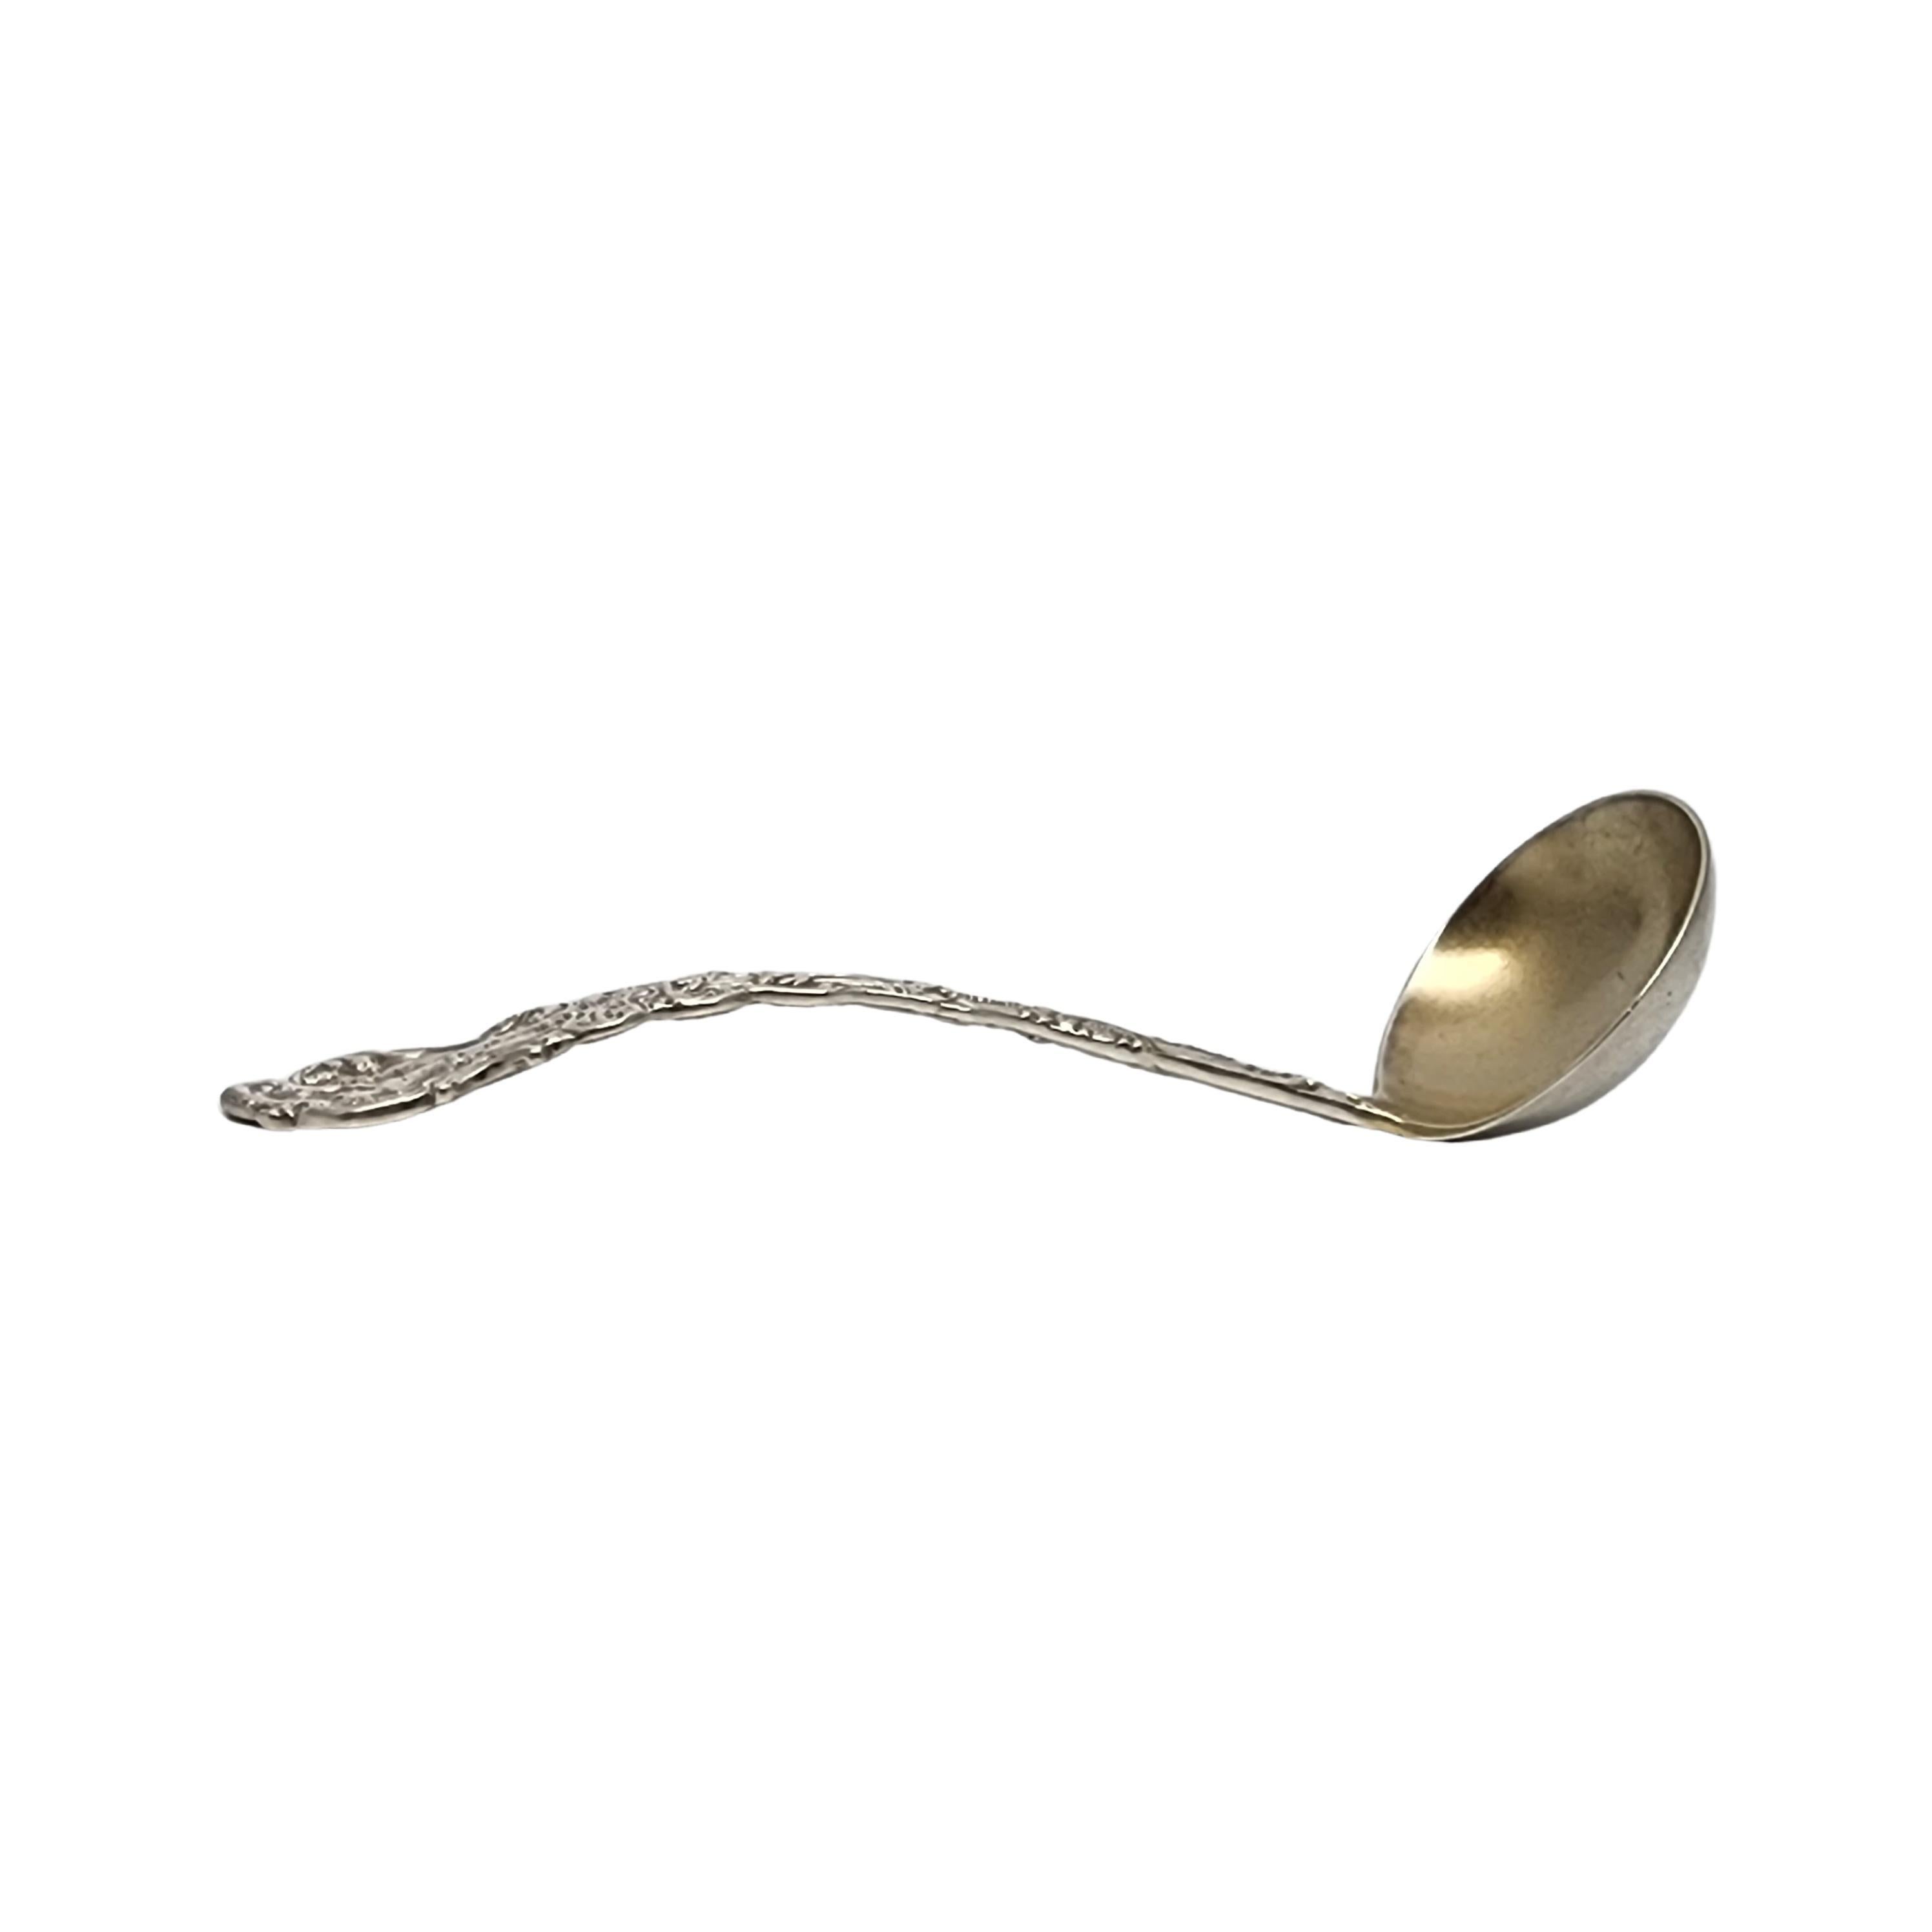 Gorham Versailles Sterling Silver Gold Wash Bowl Cream Ladle #15593 In Good Condition For Sale In Washington Depot, CT